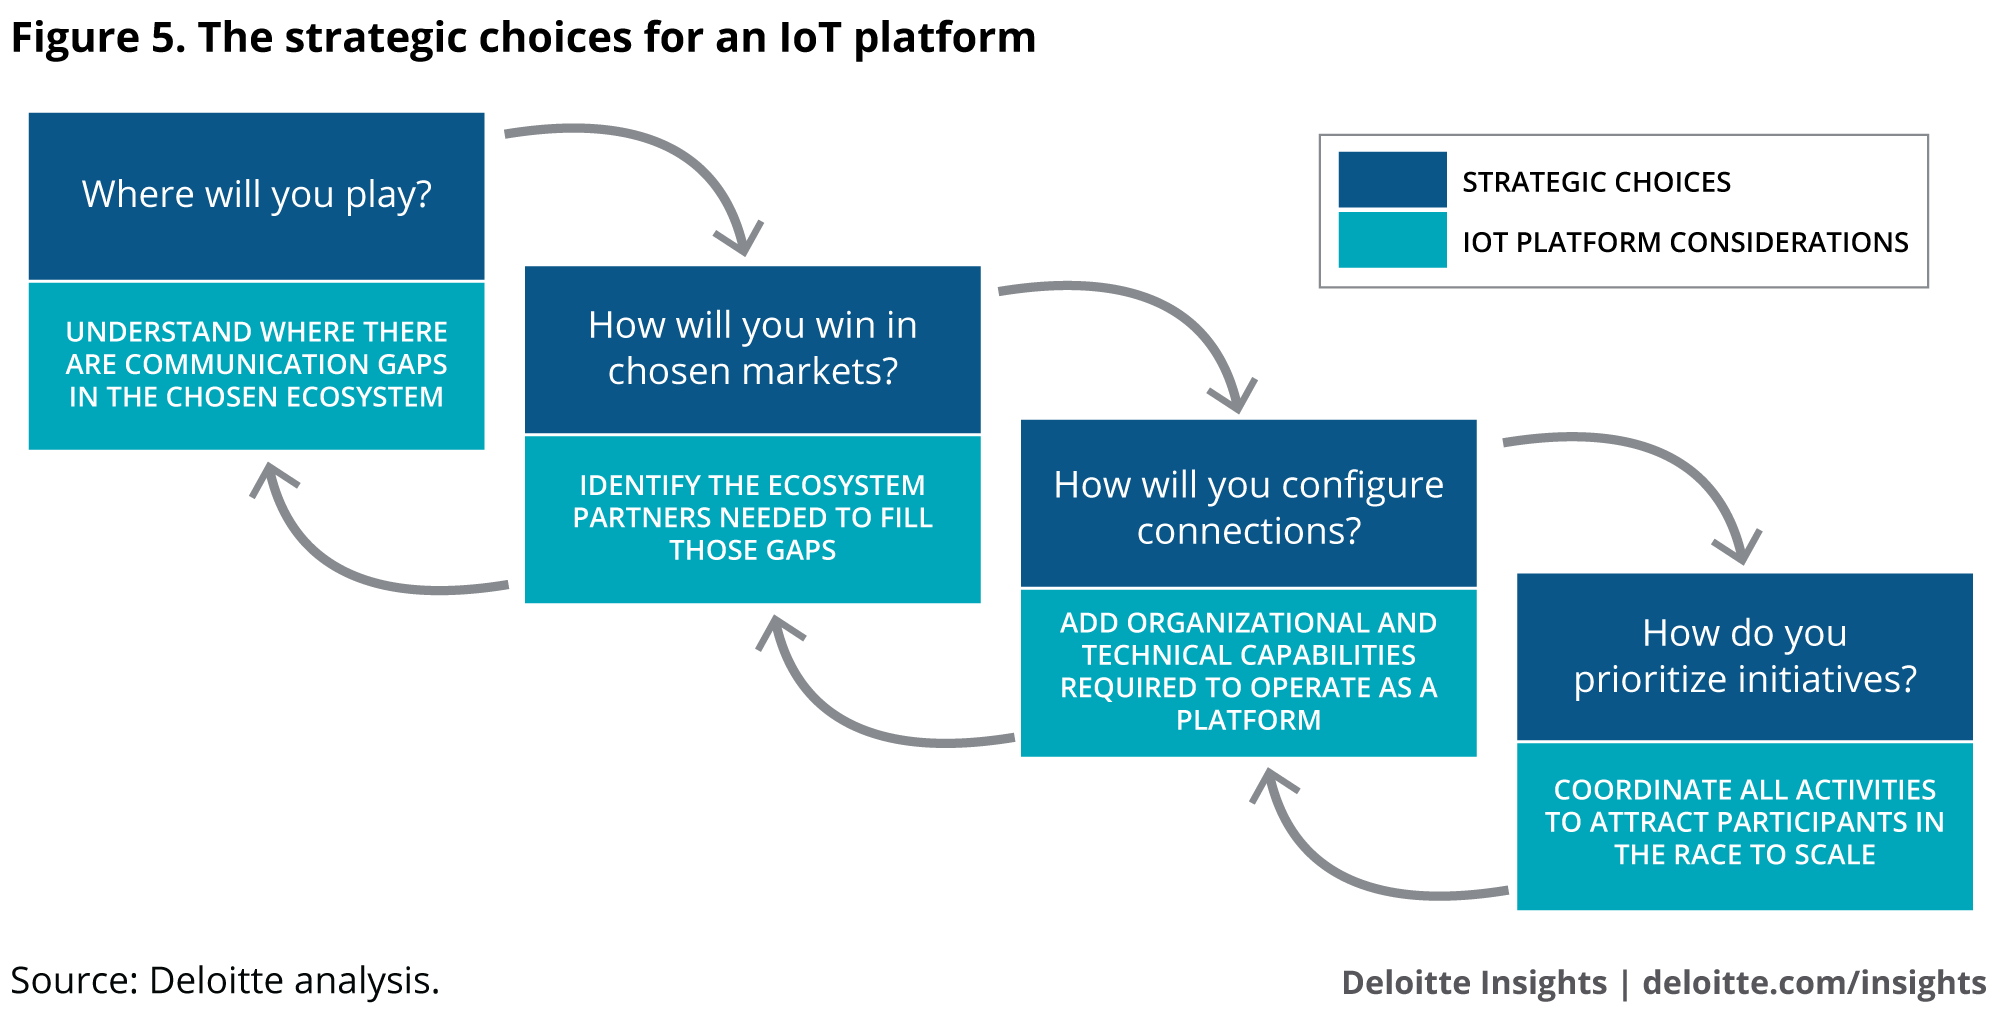 The strategic choices for an IoT platform